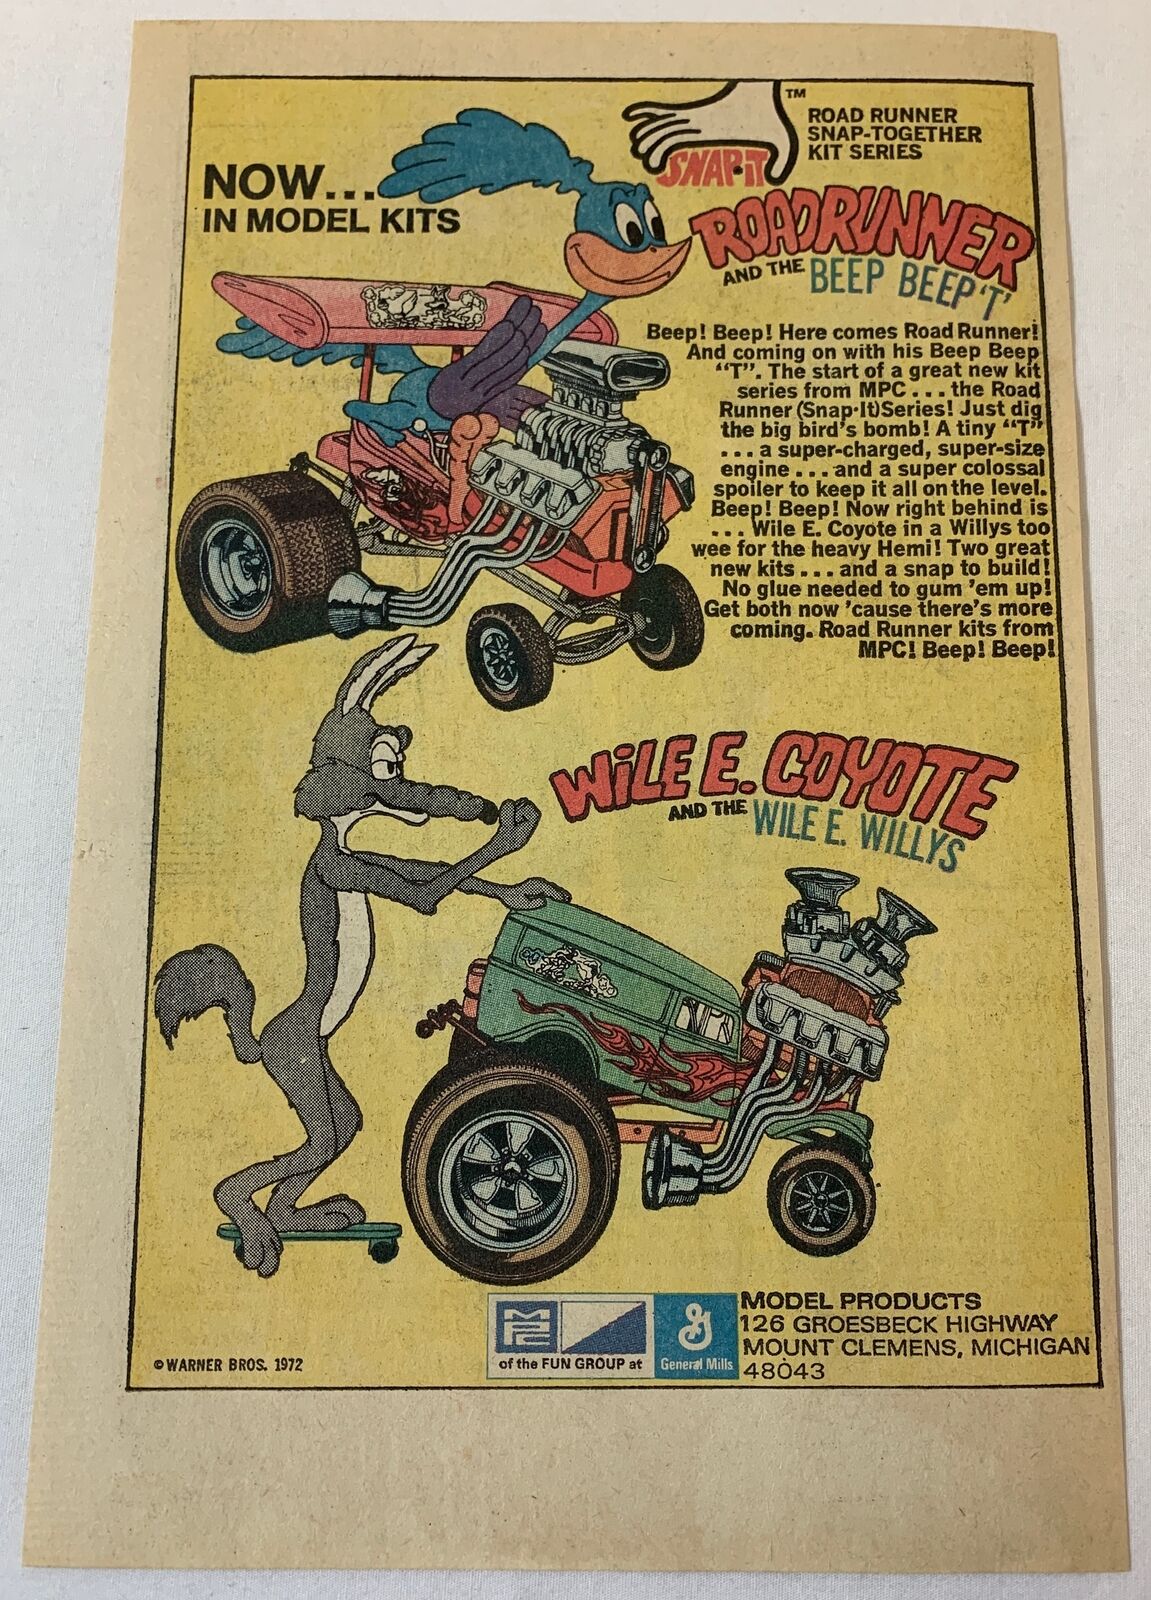 1972 MPC hot rod model kits ad page~ROAD RUNNER BEEP BEEP T,WILE E COYOTE WILLYS